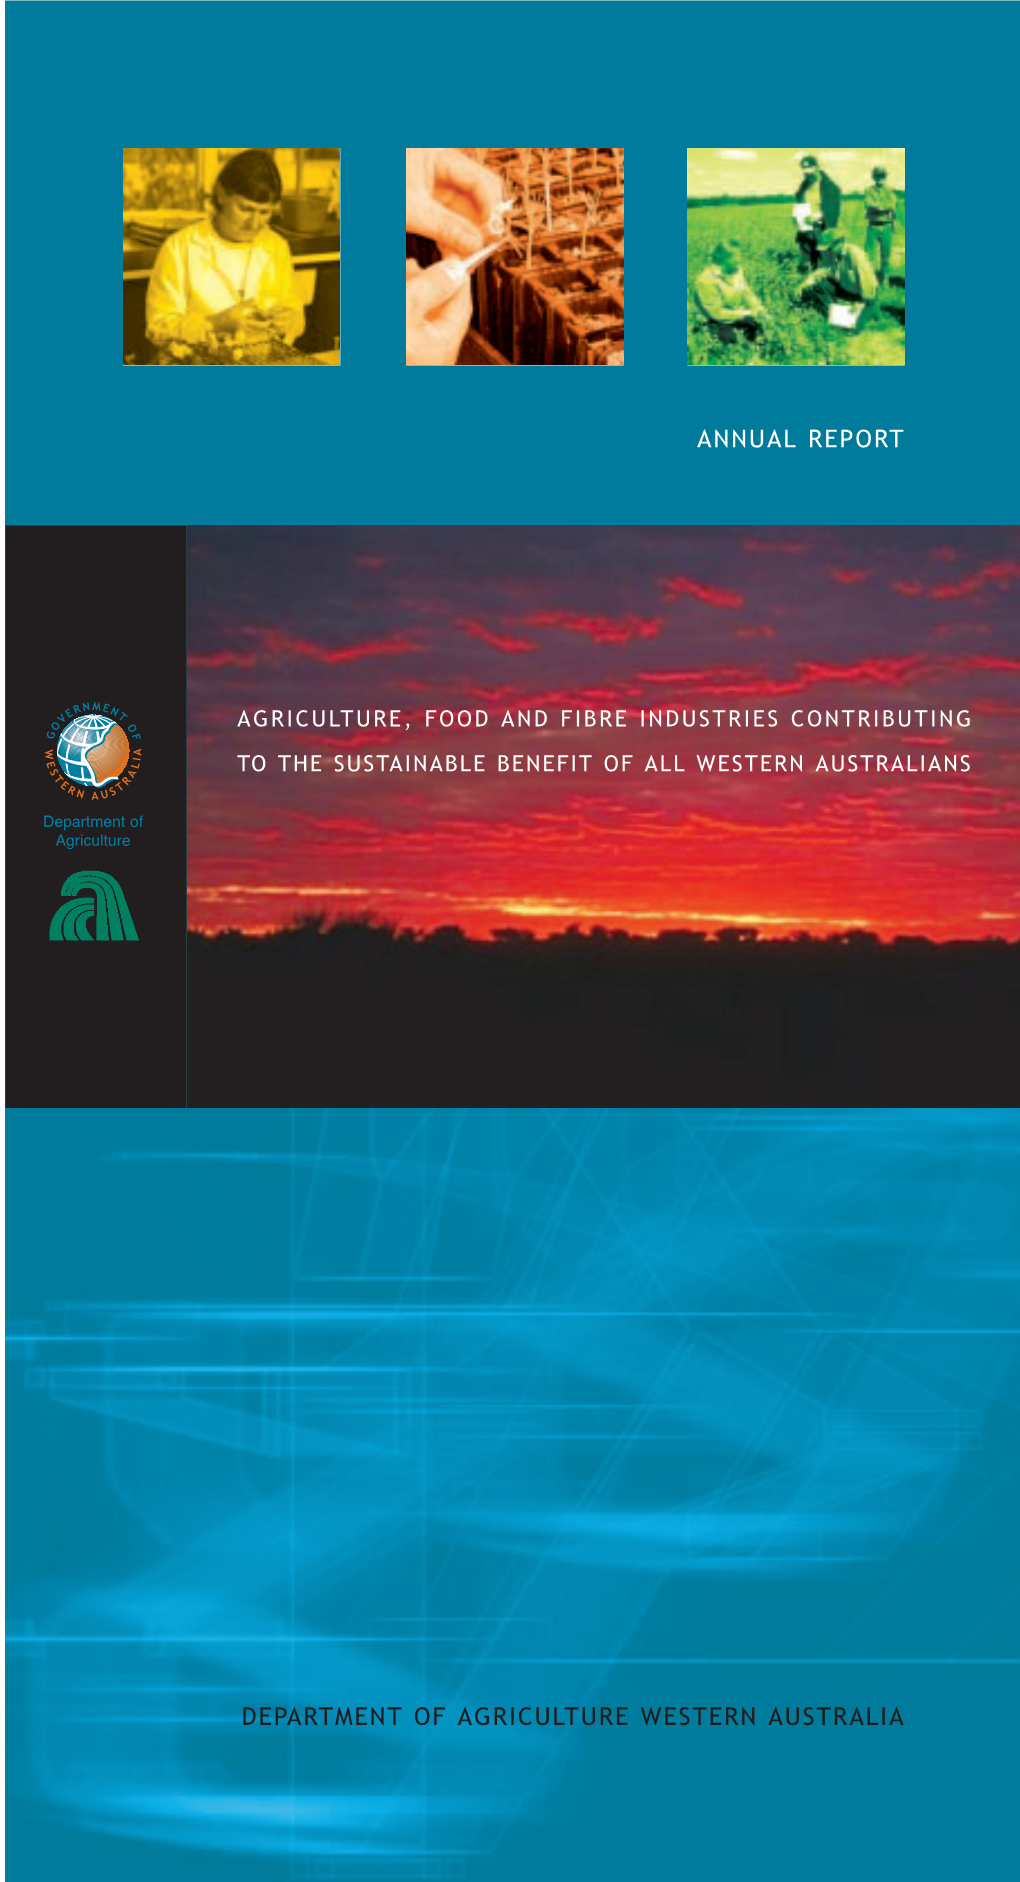 Department of Agriculture Western Australia Annual Report 2002/03